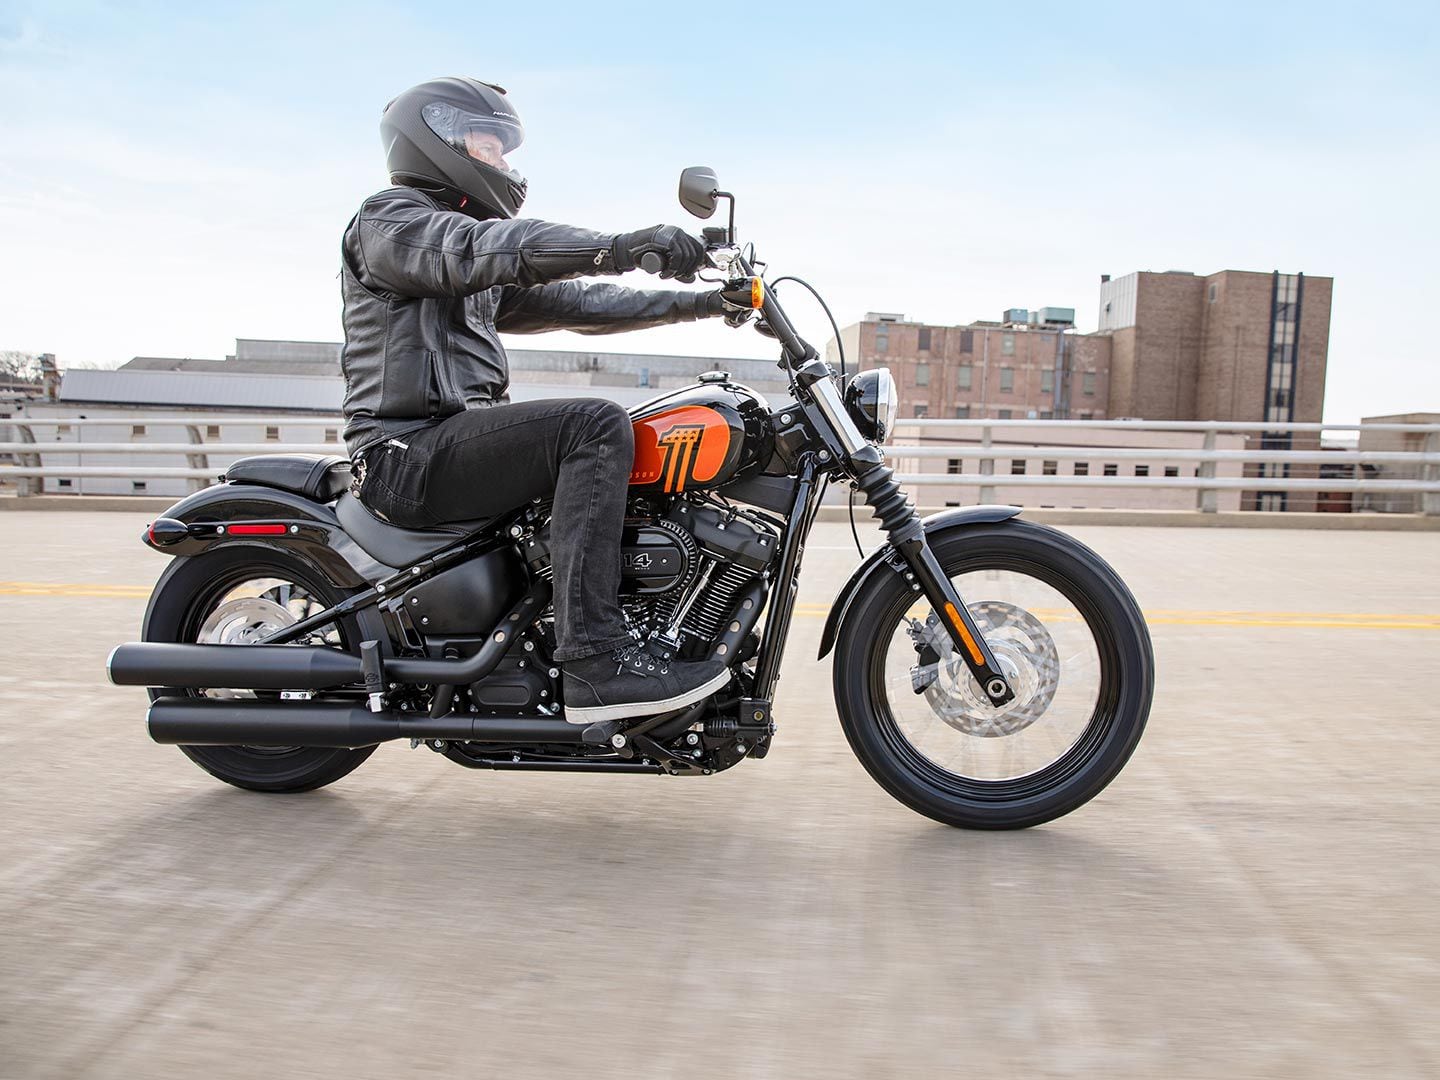 A shortened rear fender is a key feature of a bobber motorcycle, but it’s all about a stripped-down style—even for those that are factory-produced.